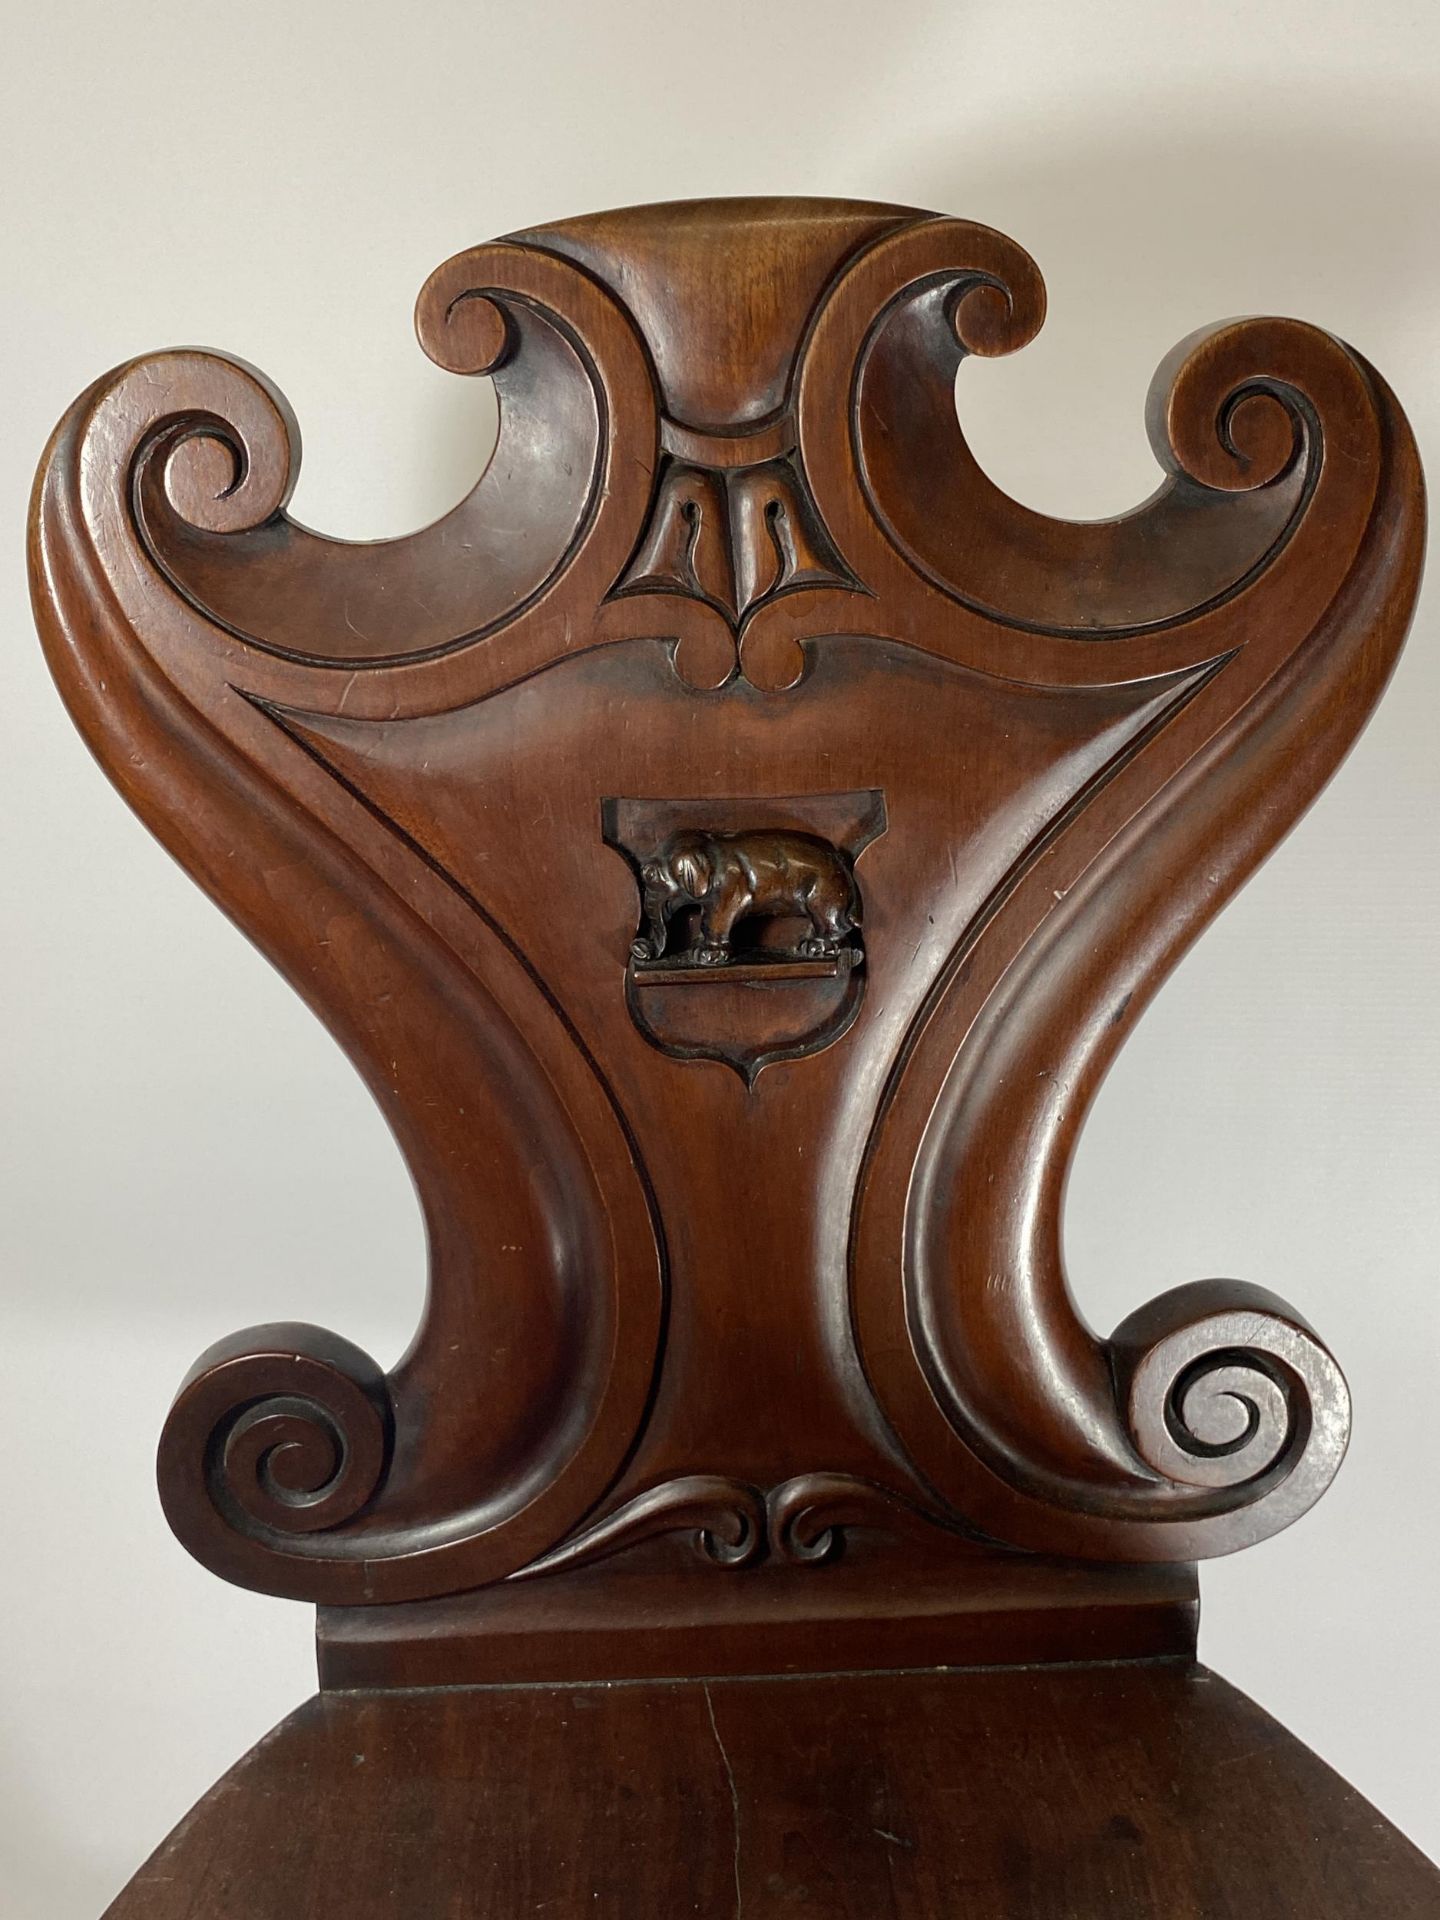 A 19TH CENTURY MAHOGANY CARVED BEDROOM CHAIR WITH ELEPHANT DESIGN BACK - Image 2 of 4